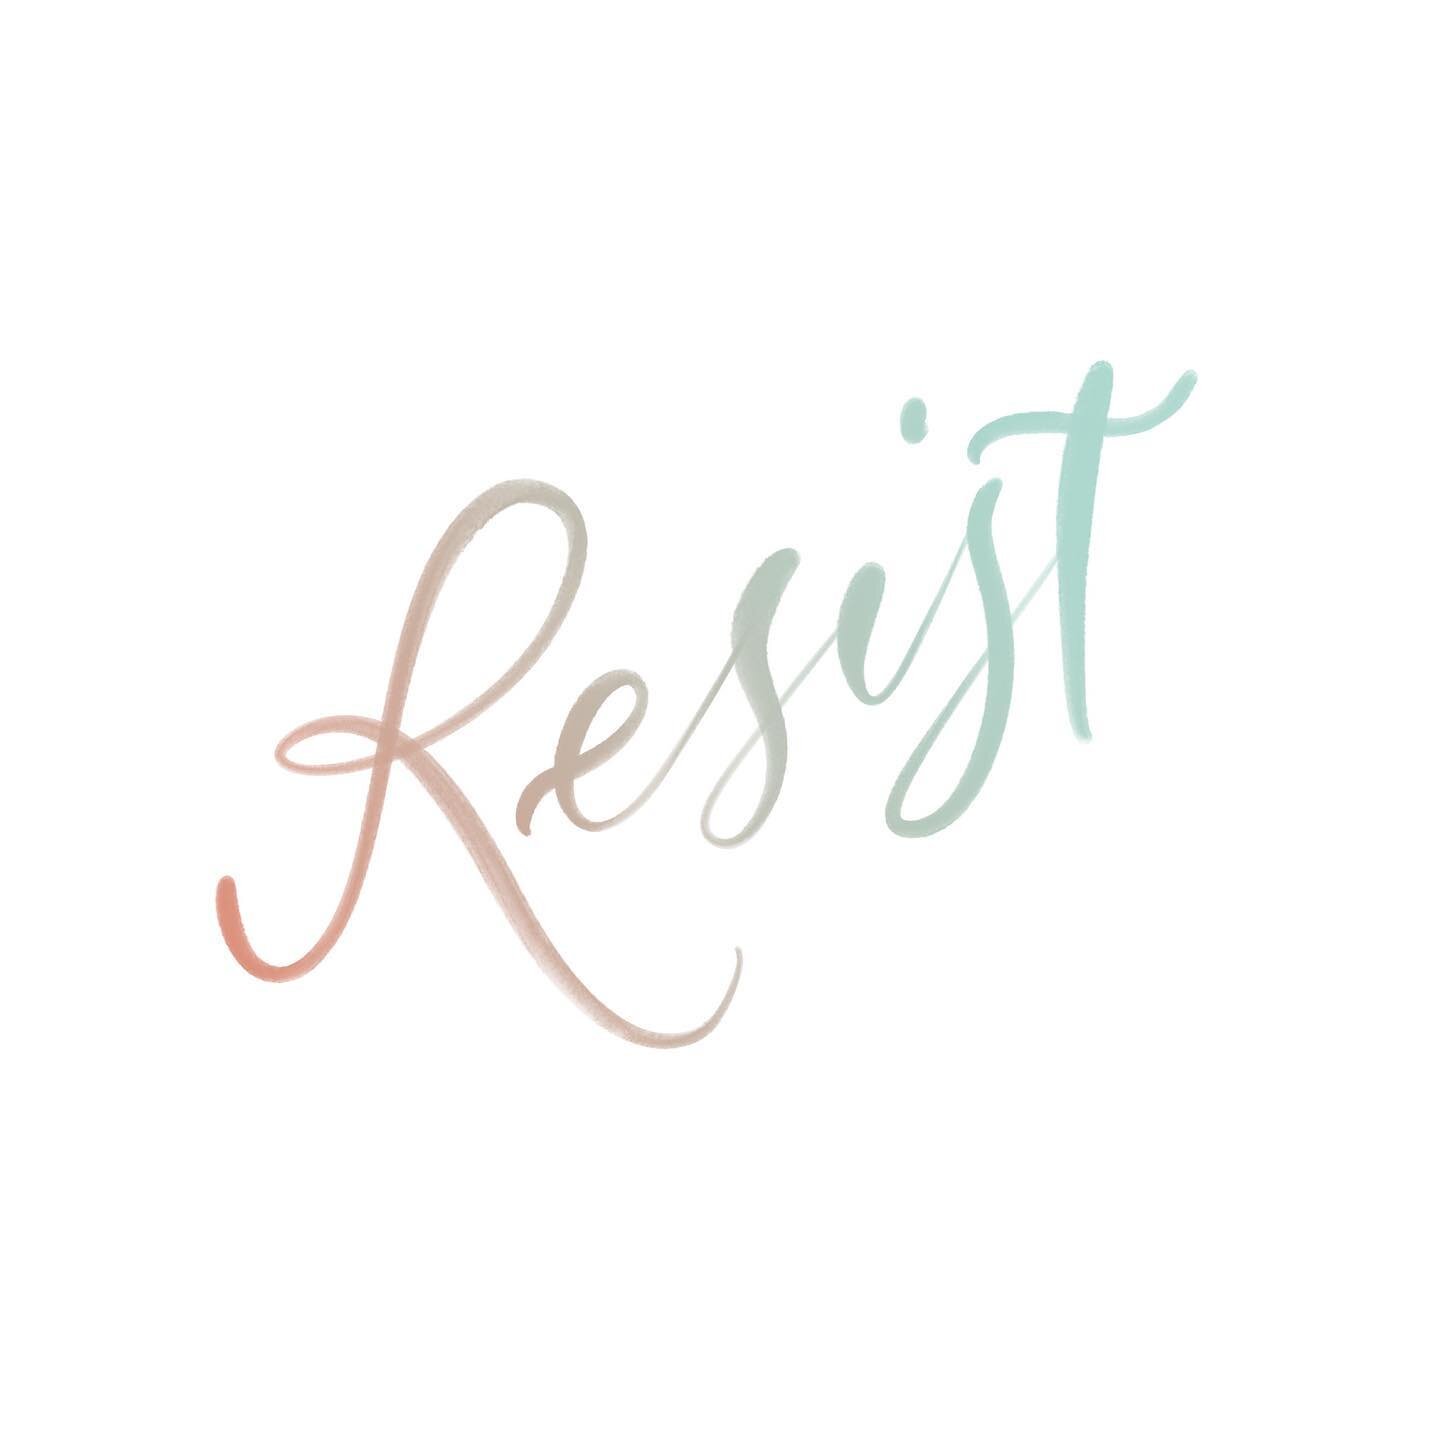 I&rsquo;ve realized some very important things after being silent on social for over a month.

We must resist. Resist racism. Resist violence. Resist oppression. 

But we need to also practice a more subtle form of resistance. We need to resist letti